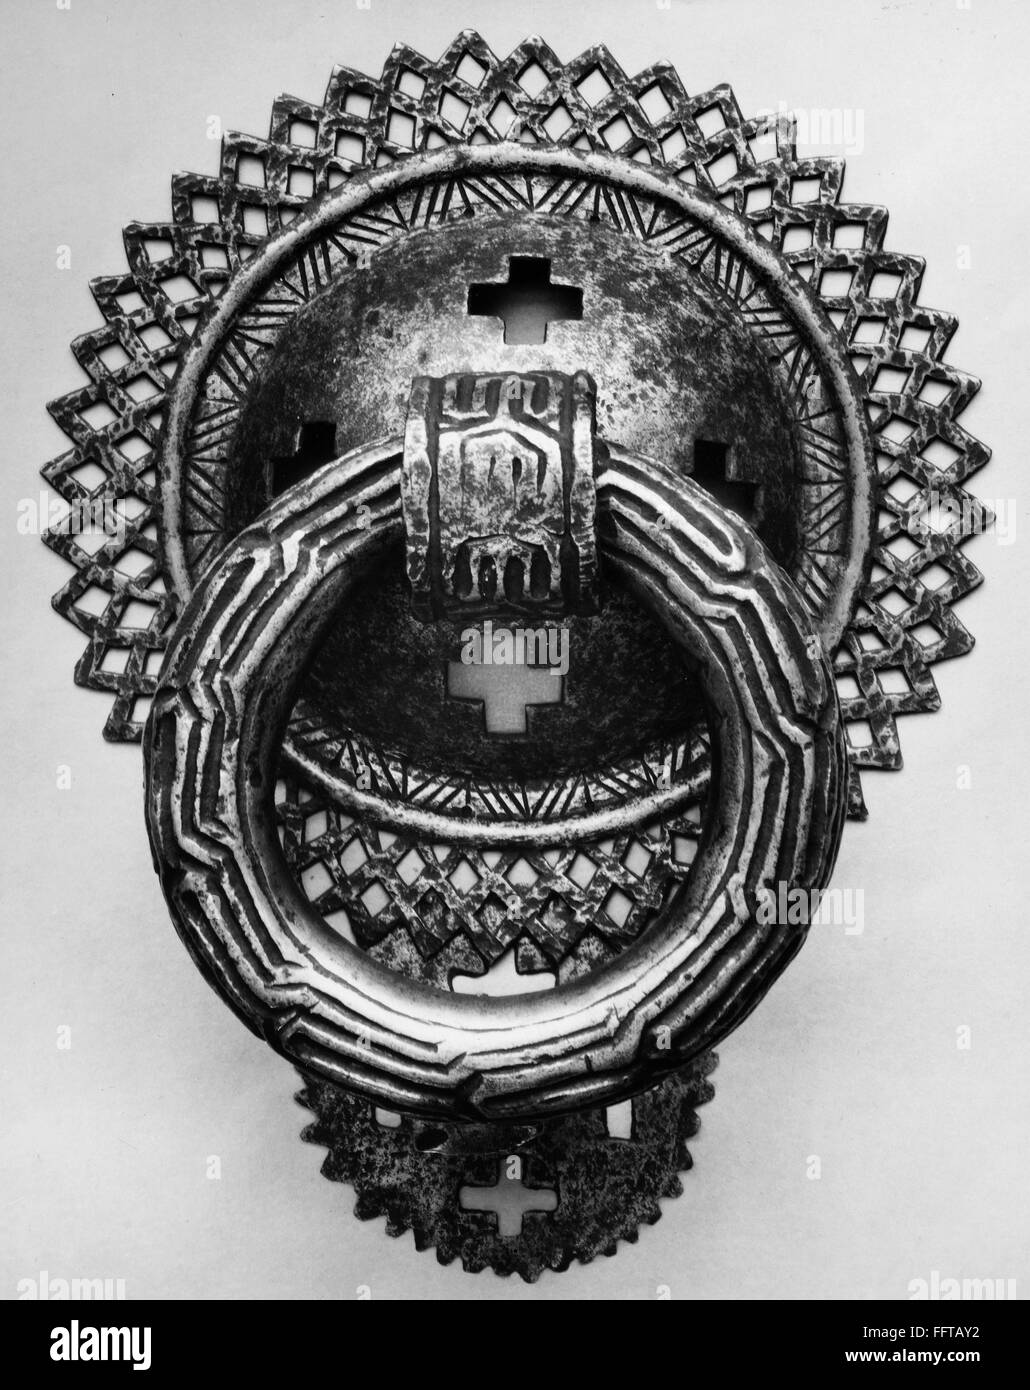 SPAIN: IRON KNOCKER. /nIron door knocker stamped with crosses, from Spain, 15th or 16th century. Stock Photo